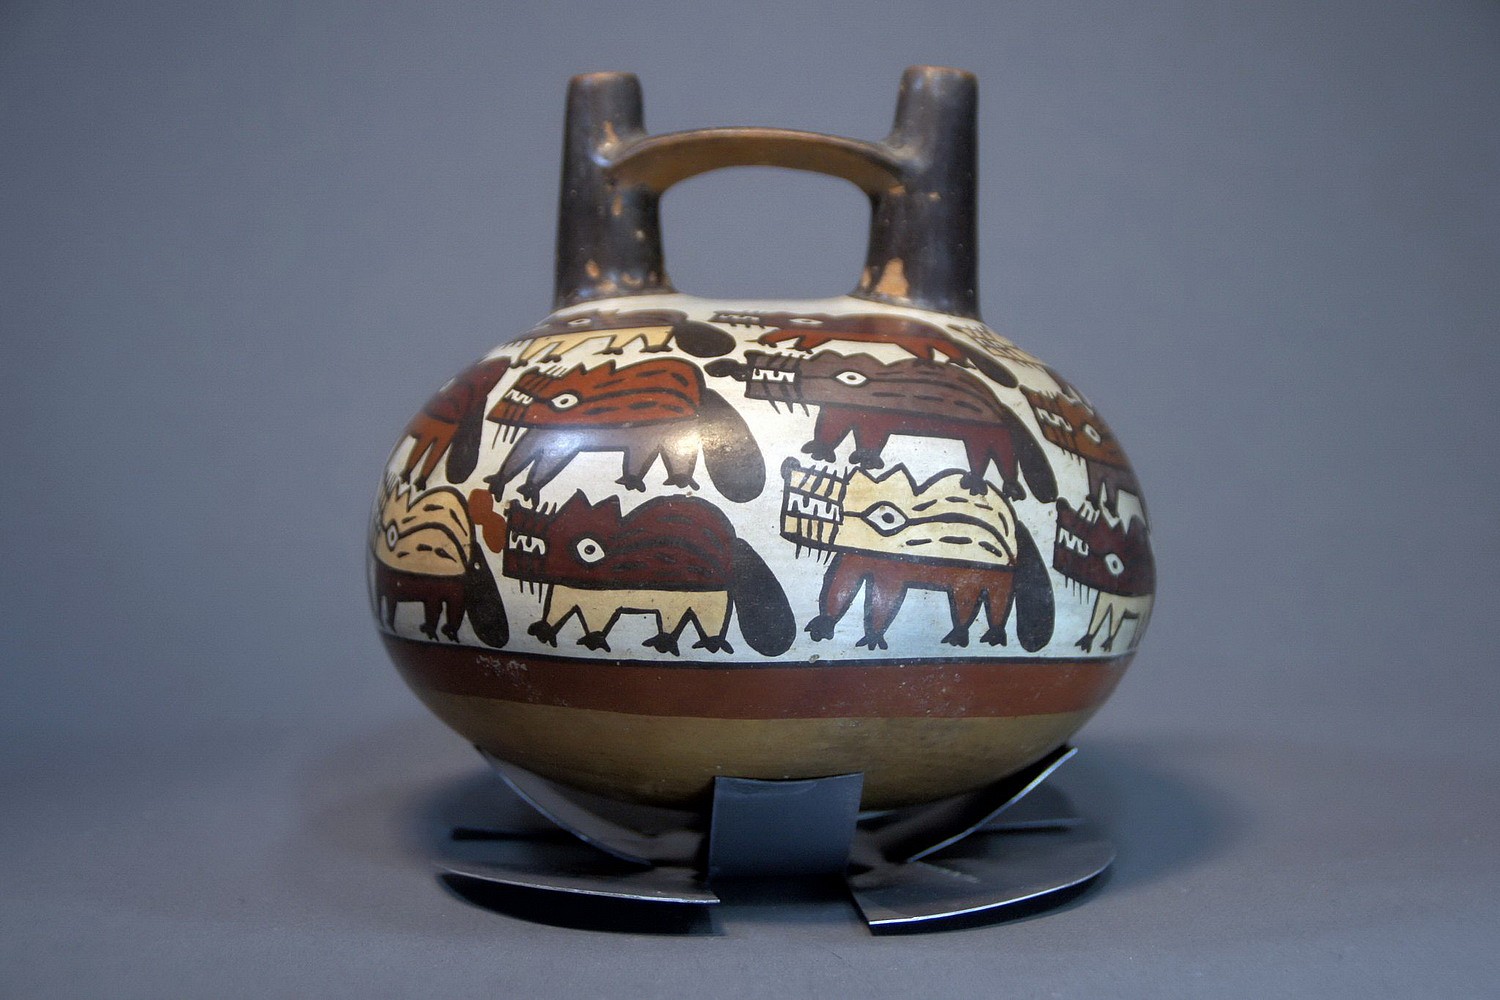 Peru, Nasca Bridgespout Vessel Painted with 23 Foxes On White Ground
A late Nasca period vessel, T/L tested, verified as 1650 years old by CIRAM Labs.  Prof. Donald Proulx in his Sourcebook of Nasca Ceramic Iconography (pg. 141) describes the Andean Fox with the following characteristics, drawn in profile with elongated snout, pointed ears, whiskers and thick black tail. Deiter Eislab Illustrated 5 ceramics with similar painted foxes in ALTPERUANISCHE KULTUREN NAZCAII, plate 6-9.
Media: Ceramic
Dimensions: Height; 5 1/2" x  Diameter: 6"
Price Upon Request
n4052